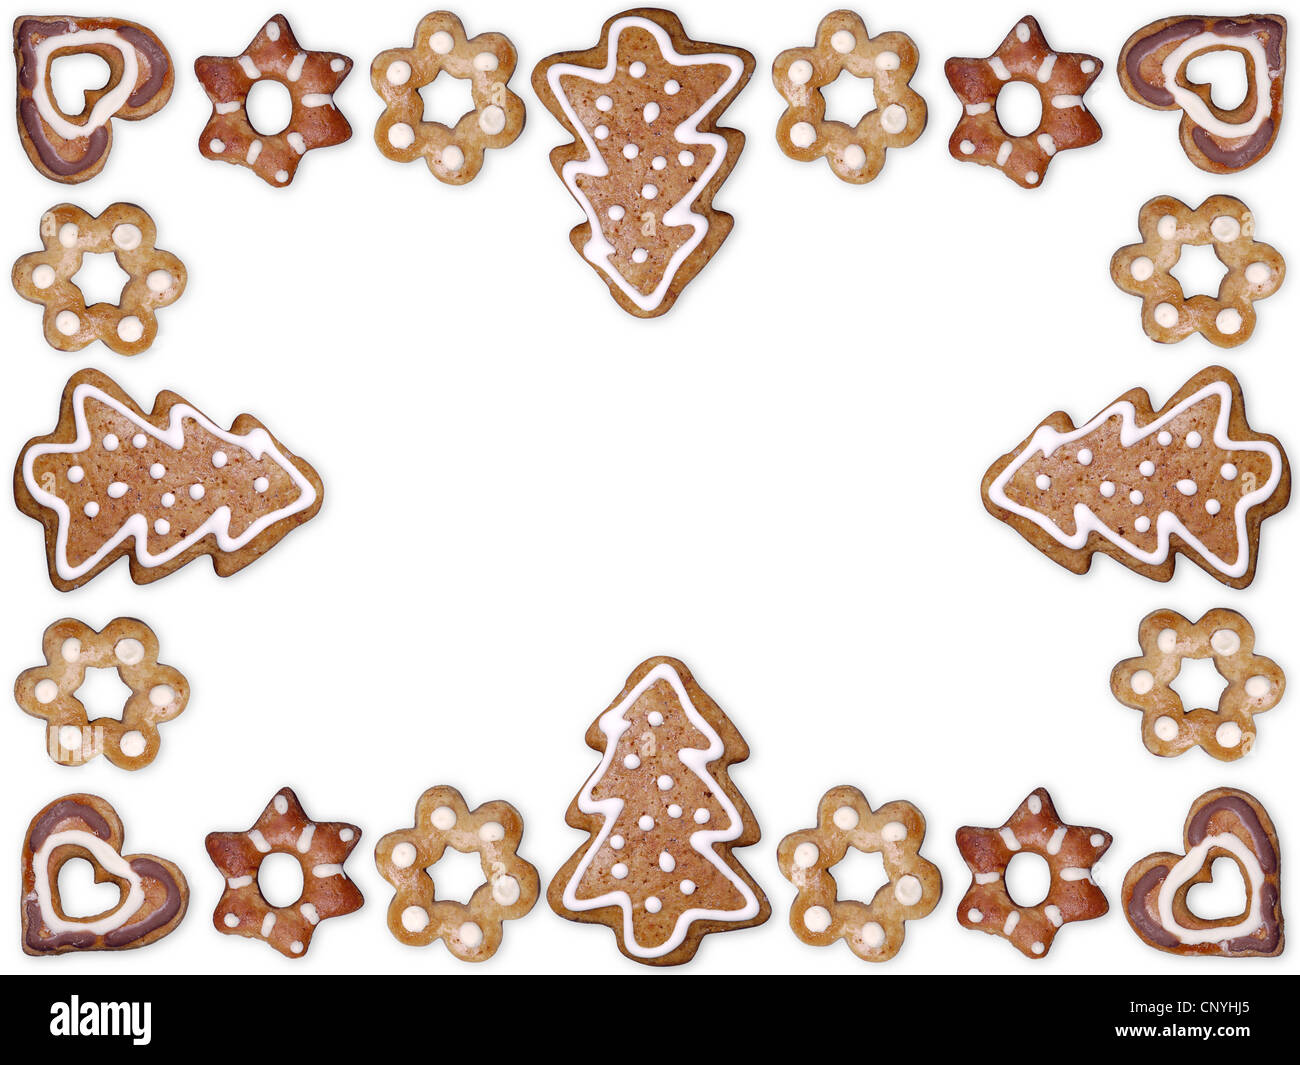 Decorative seasonal shape gingerbread cookies arranged into frame with white background Stock Photo